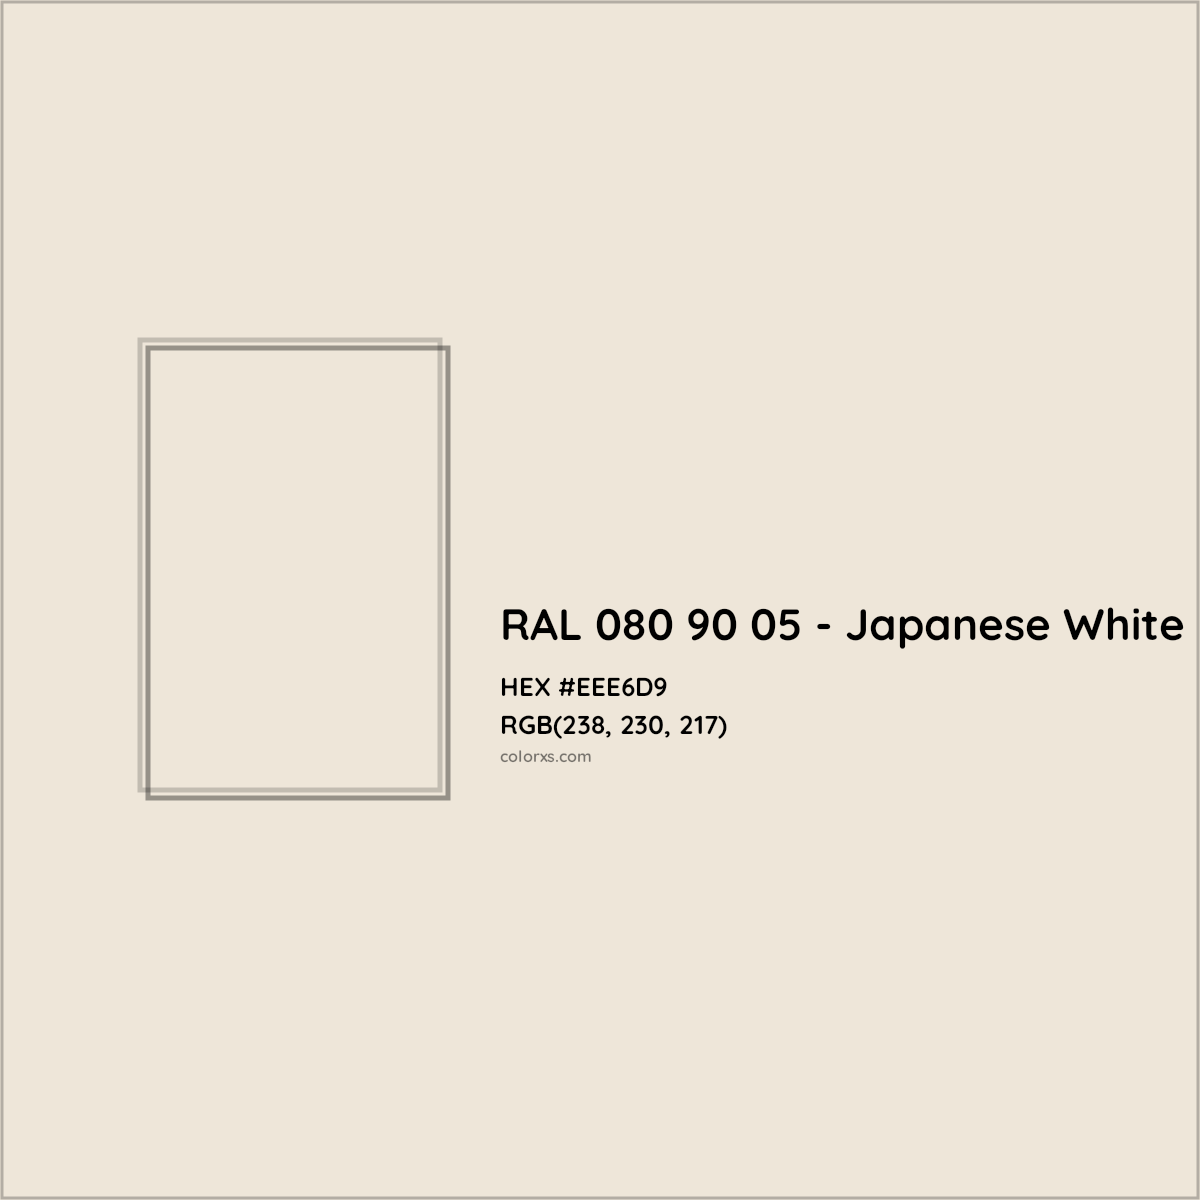 HEX #EEE6D9 RAL 080 90 05 - Japanese White CMS RAL Design - Color Code